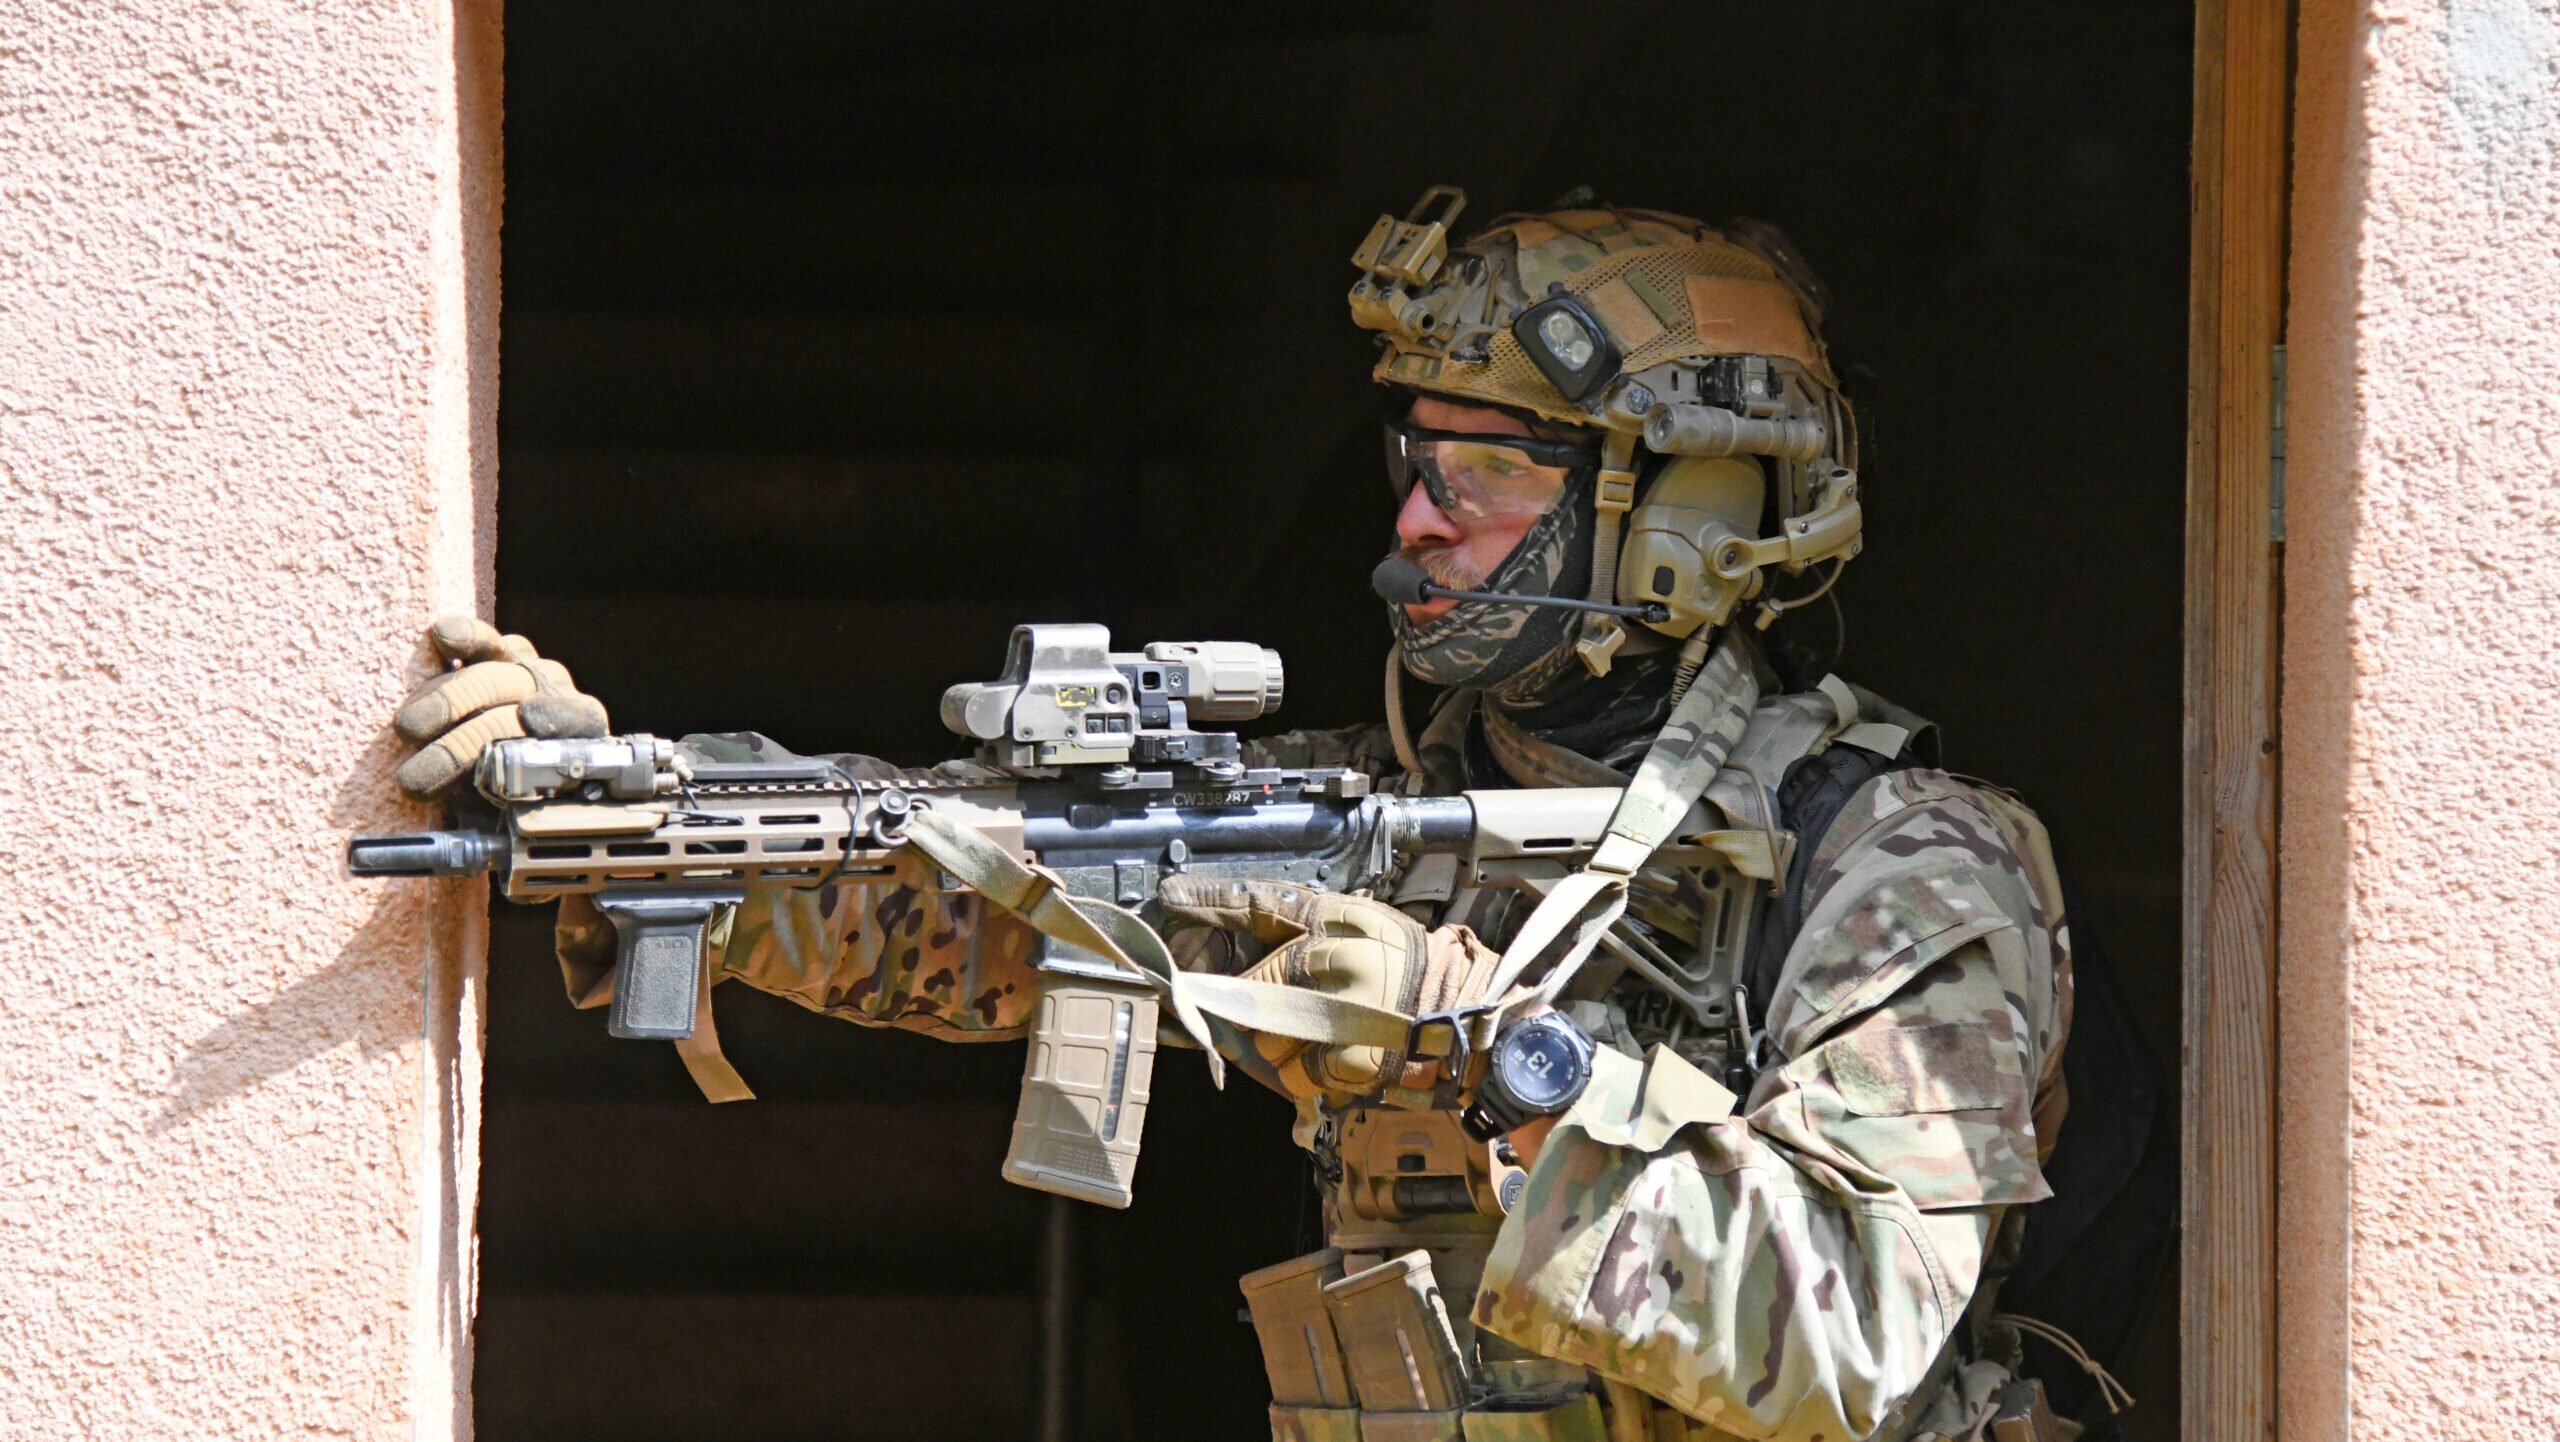 Fewer special ops, more tech: Formal force structure cements a trimmer Army